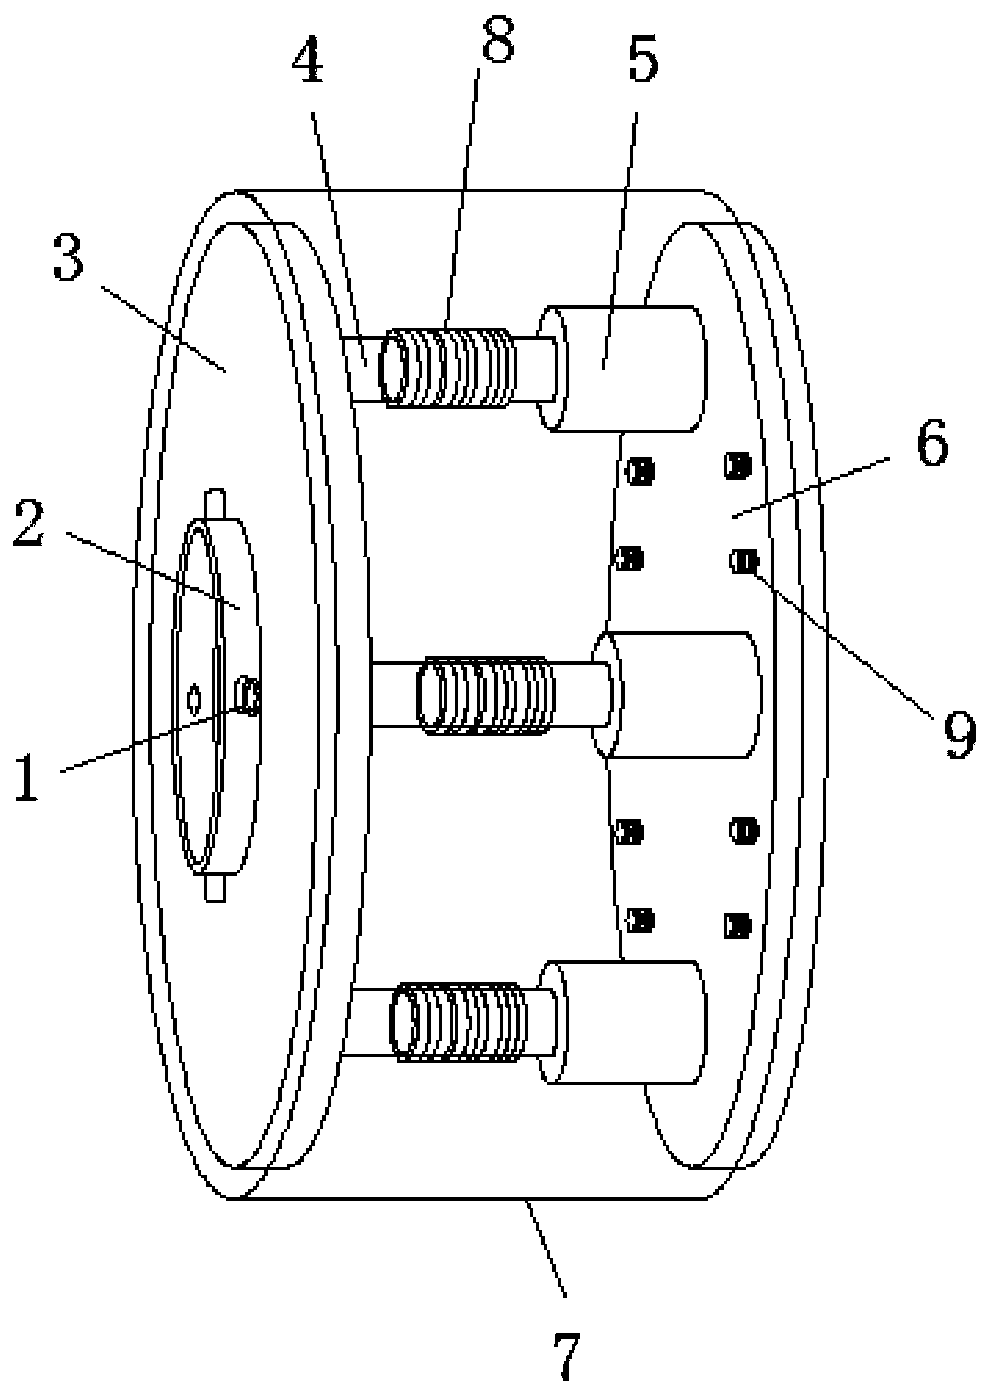 Tunneling angle fine-tuning device of shield machine